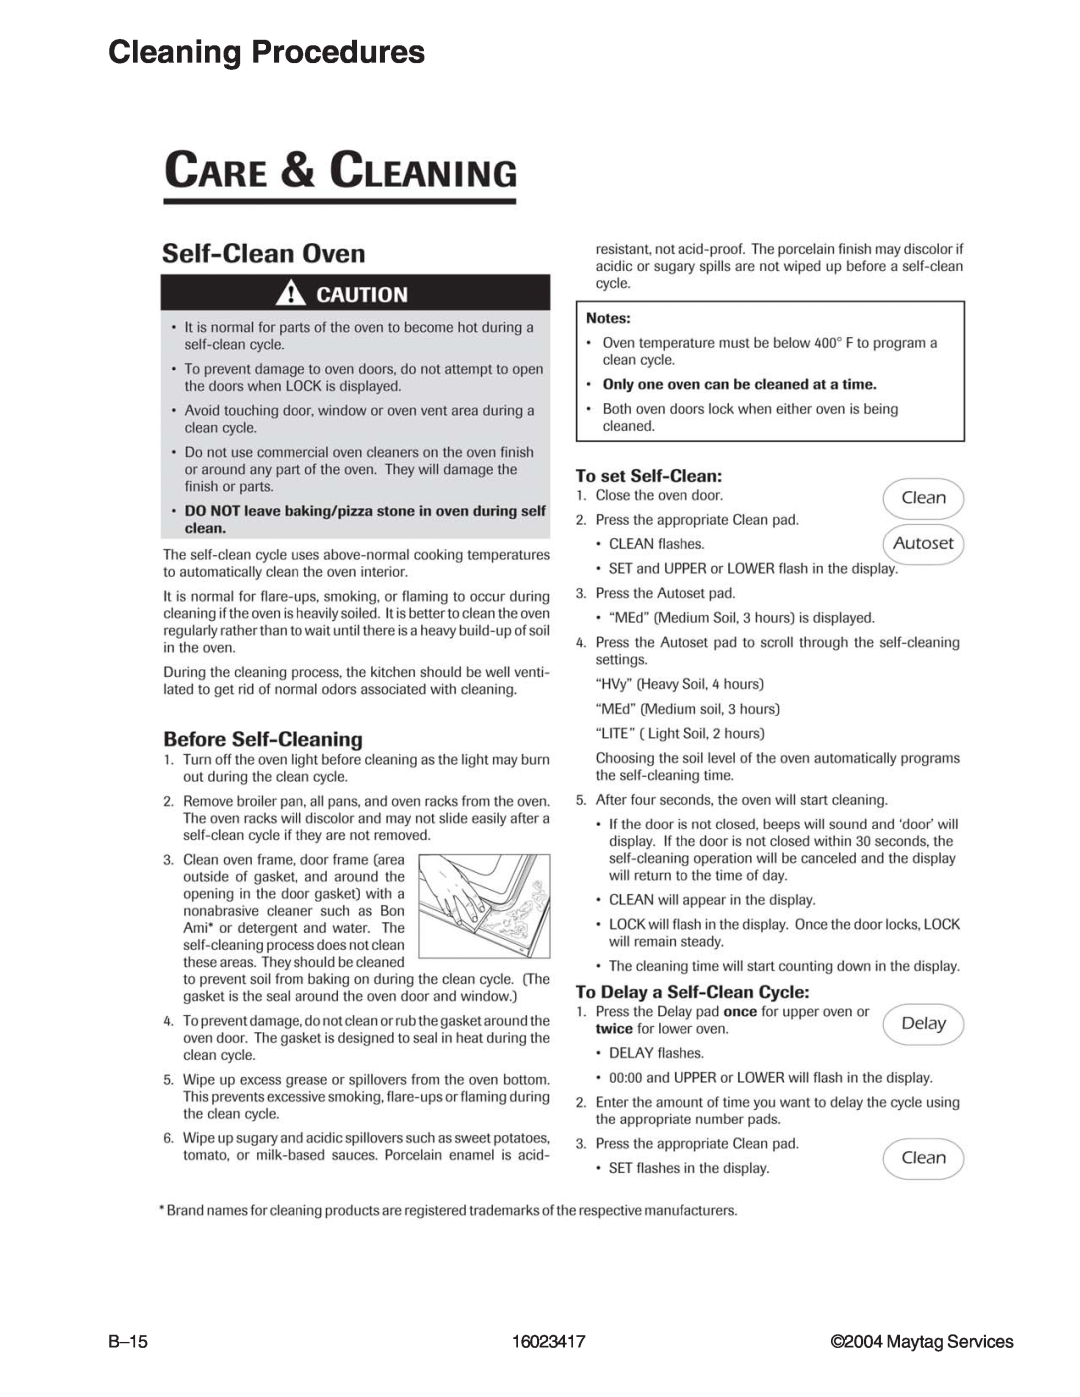 Jenn-Air JDR8895ACS/W, JDR8895AAB/S/W manual Cleaning Procedures, B–15, 16023417, Maytag Services 